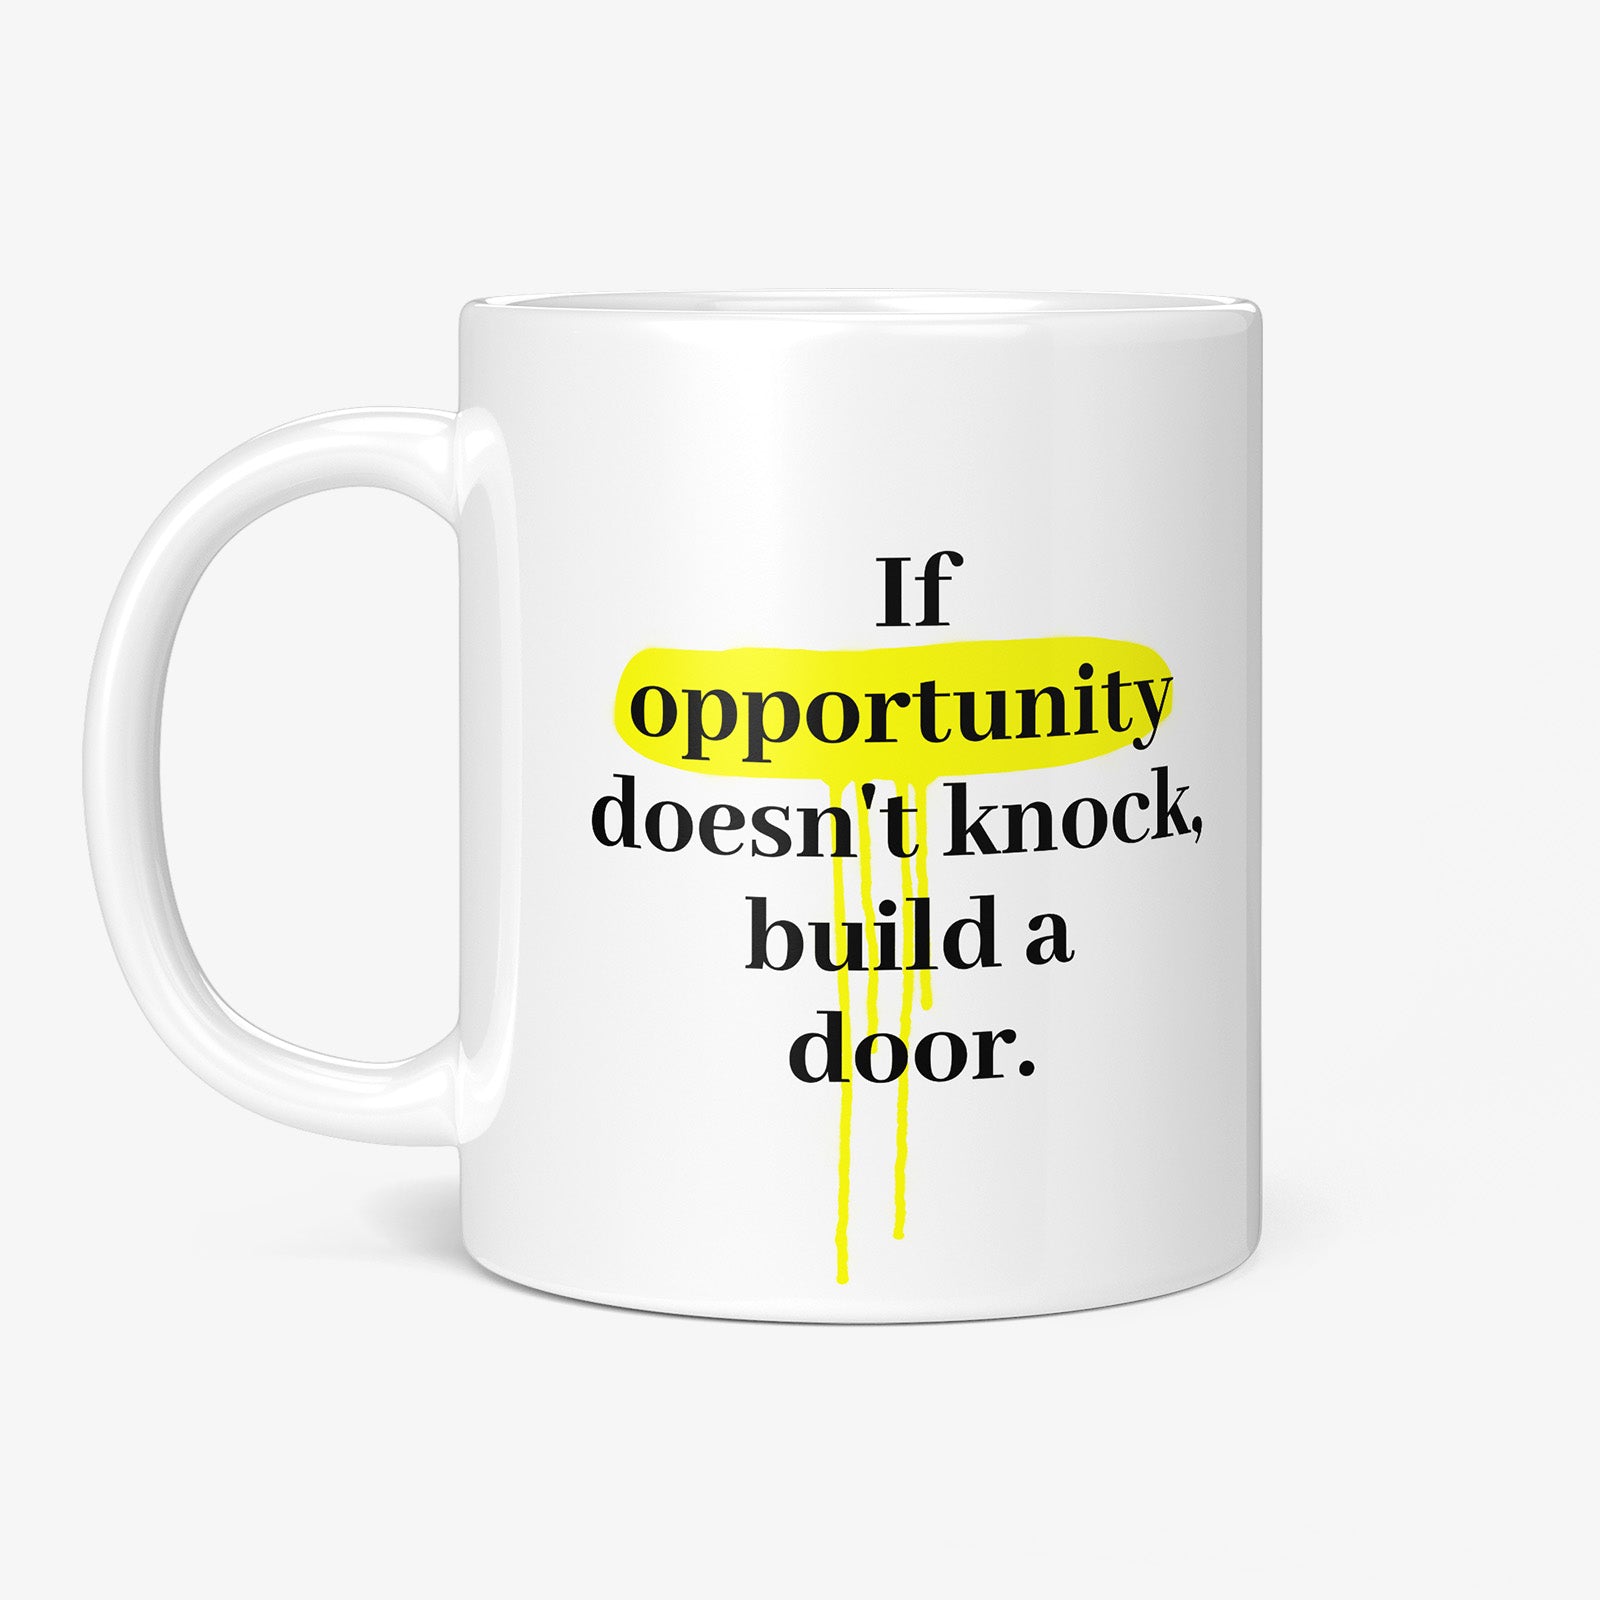 Be inspired by Milton Berle's famous quote, "If opportunity doesn't knock, build a door" on this white and glossy 11oz coffee mug with the handle on the left.